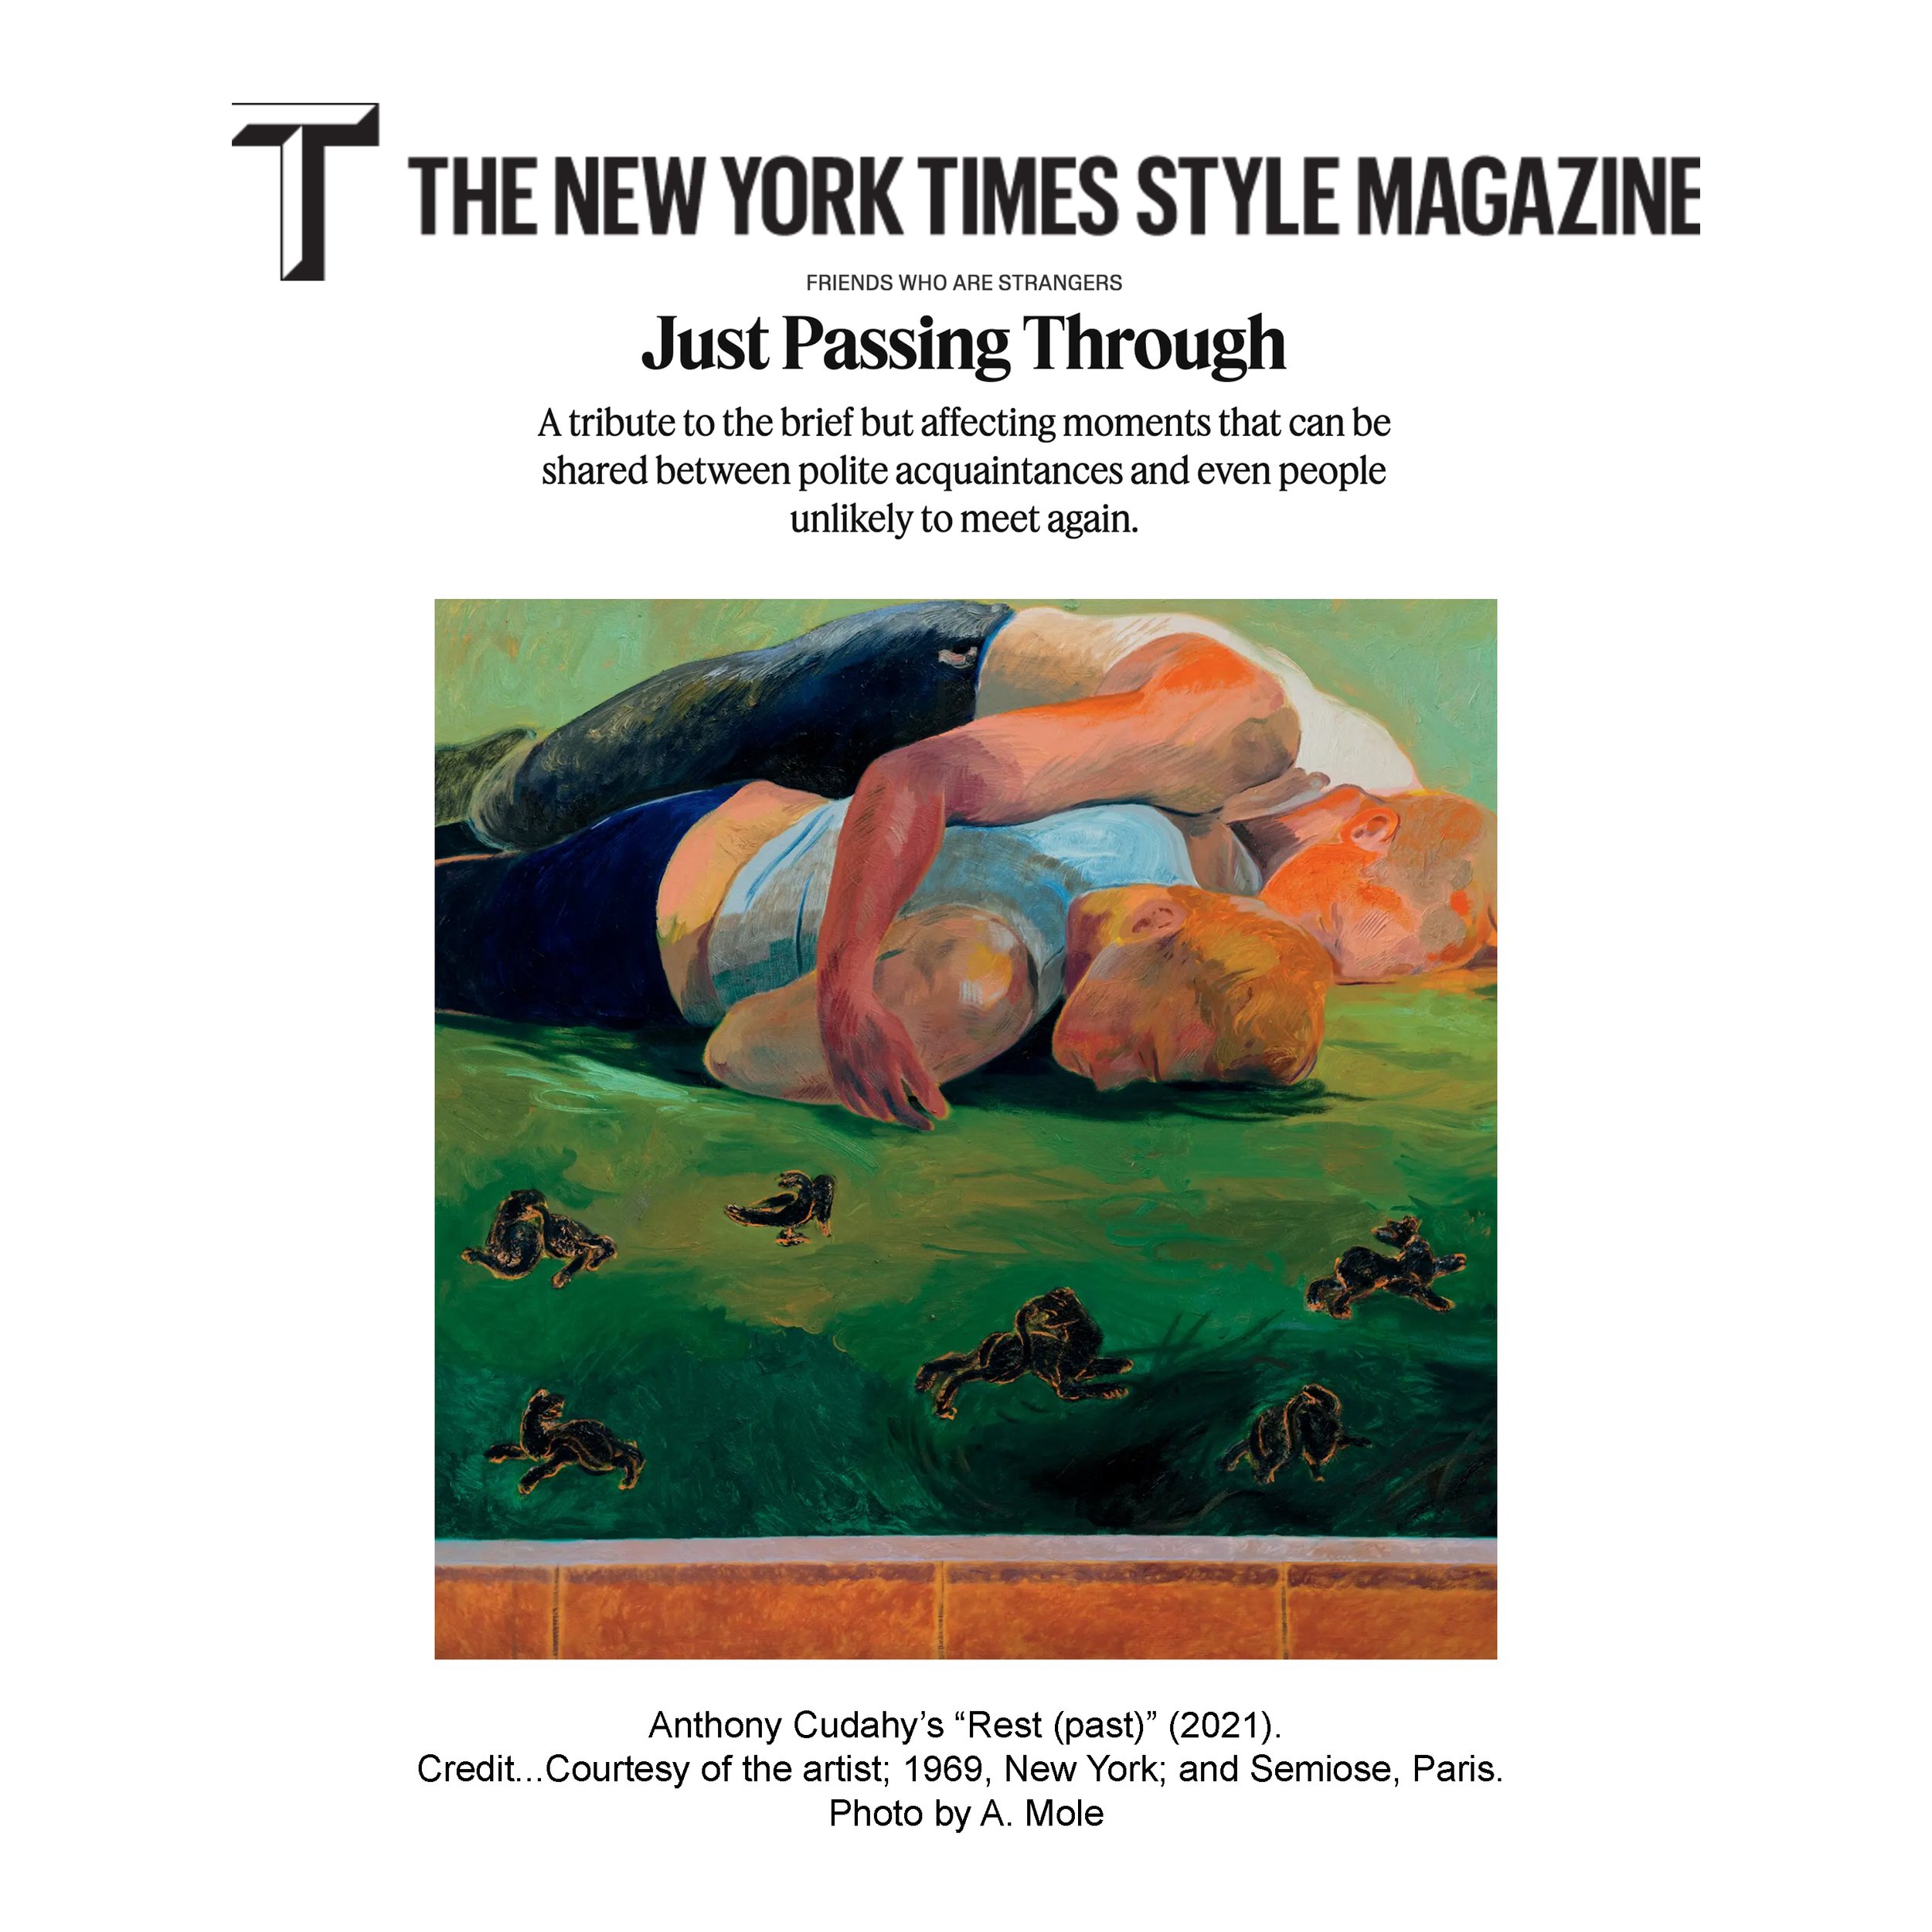 THE NEW YORK TIMES STYLE MAGAZINE - APRIL 2021